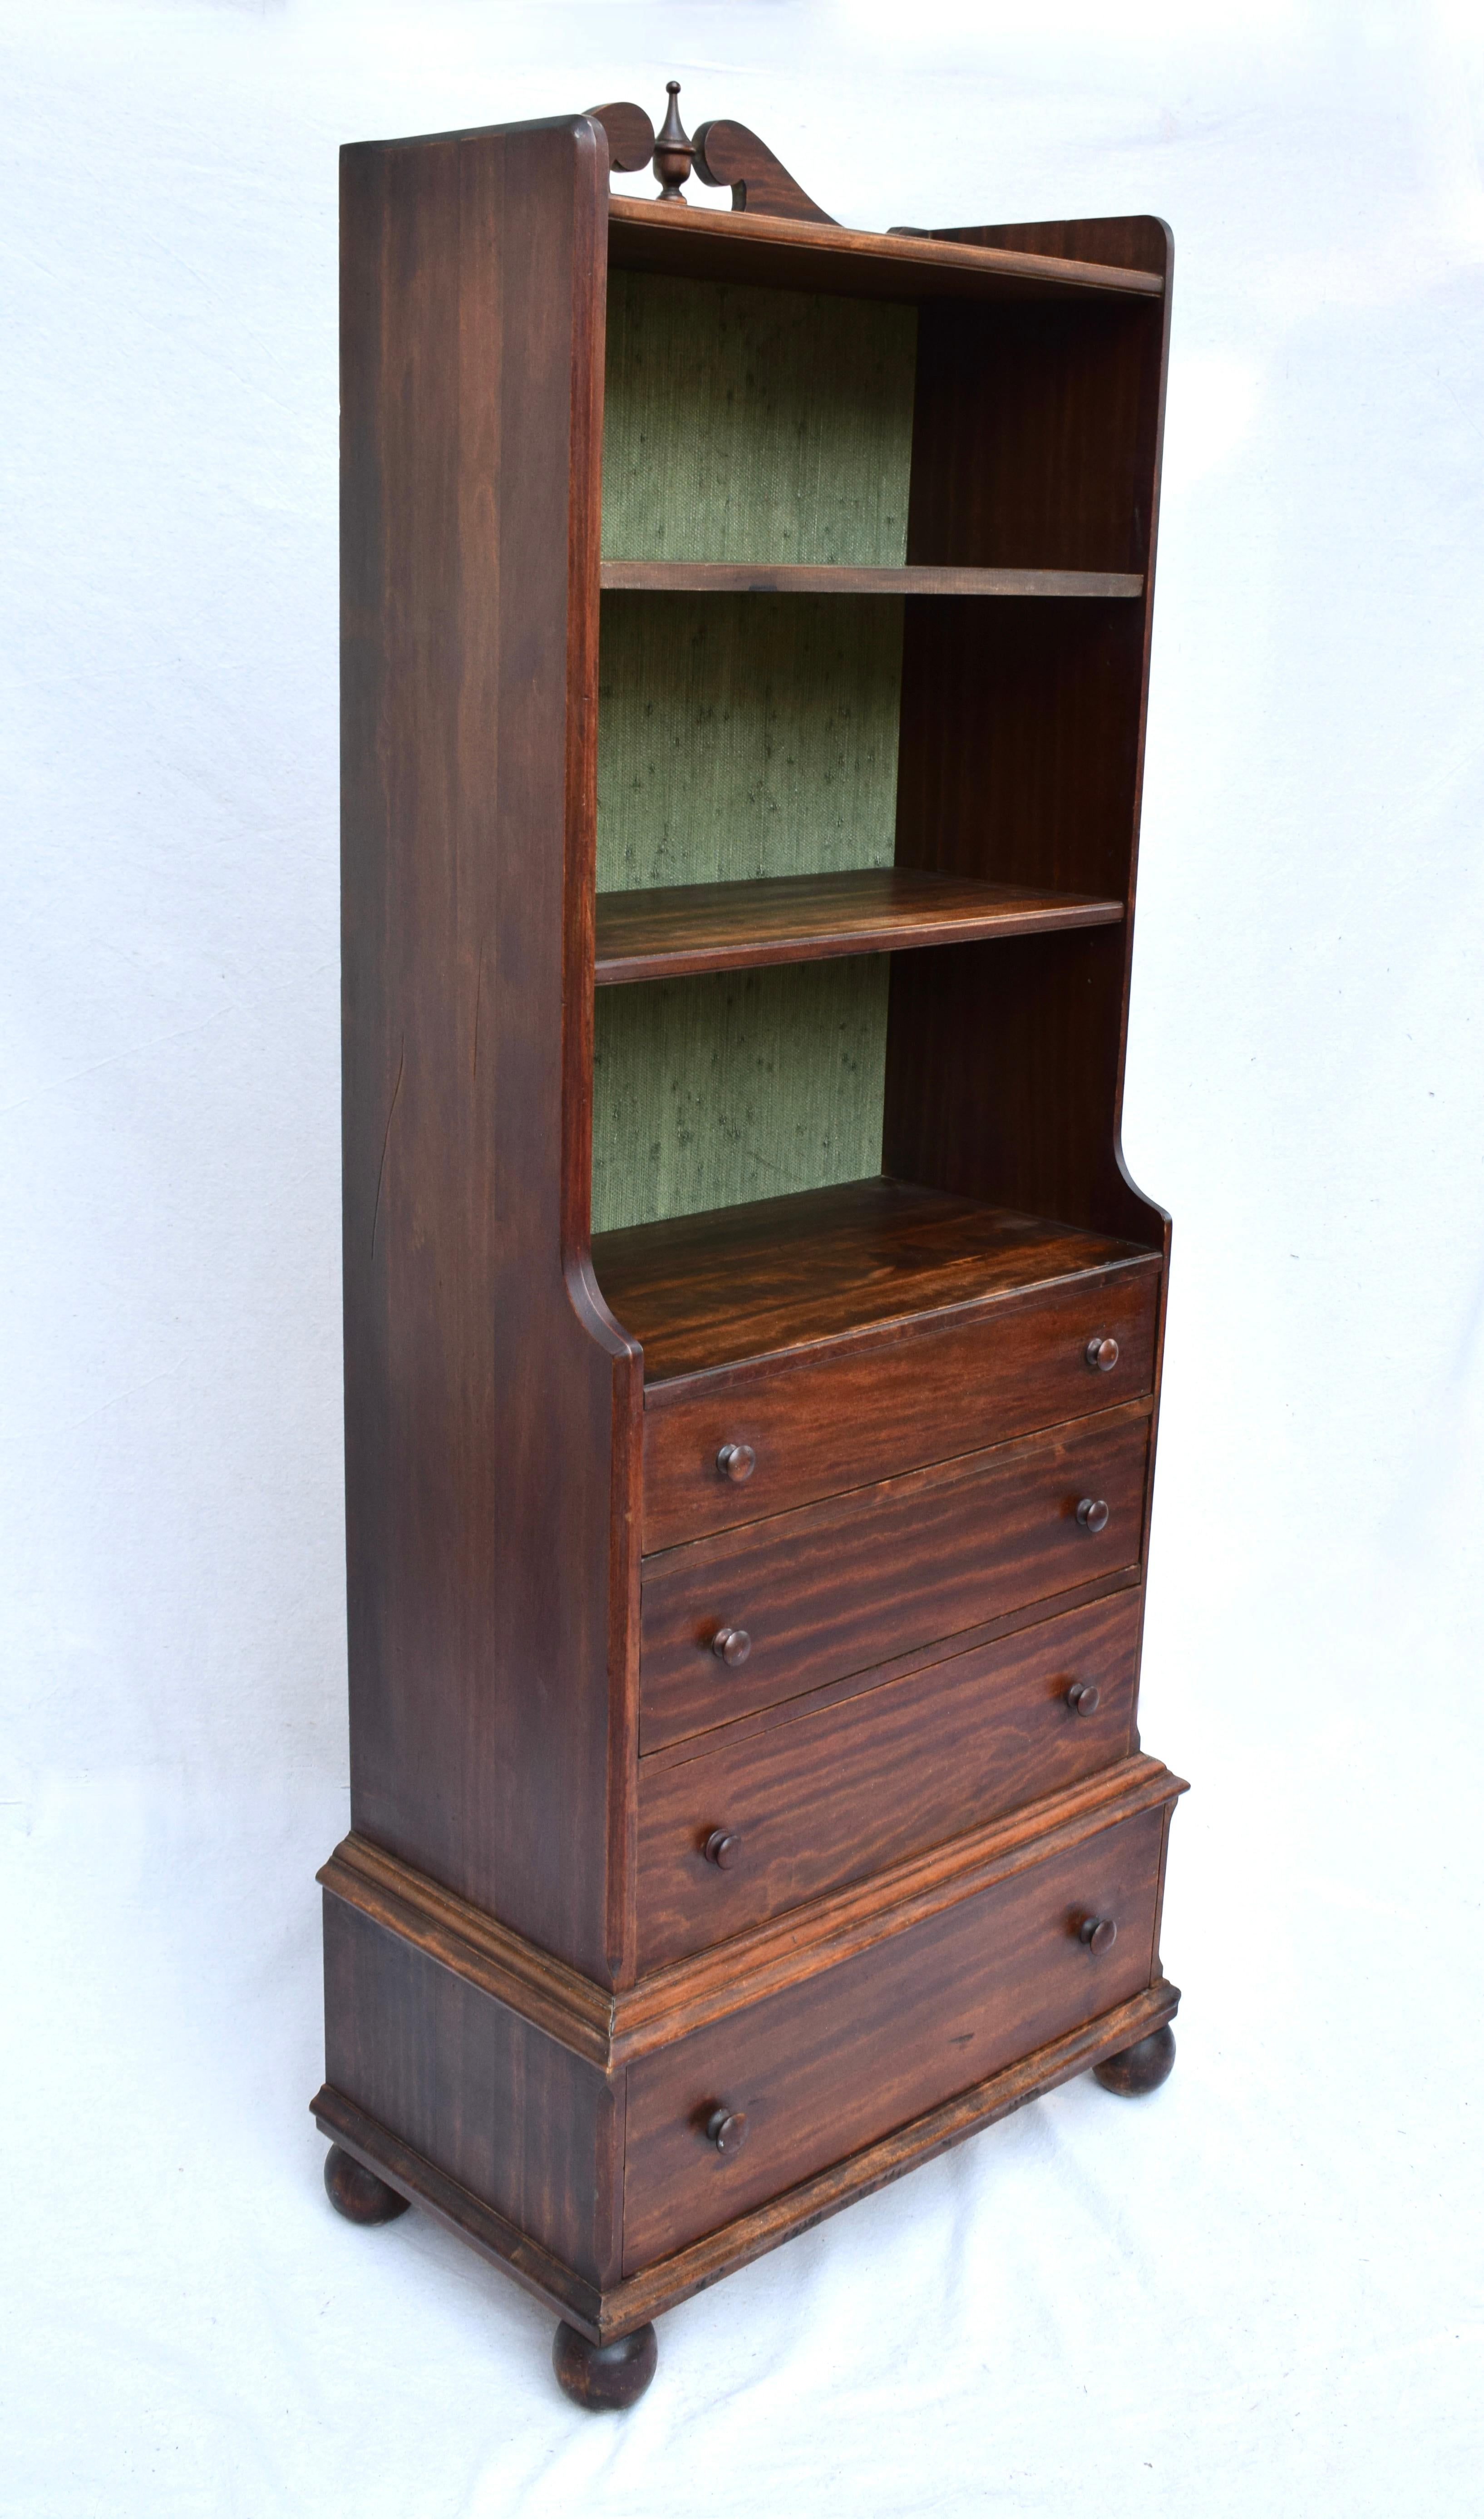 20th Century Chippendale Style Mahogany Bookcase With Cannonball Feet For Sale